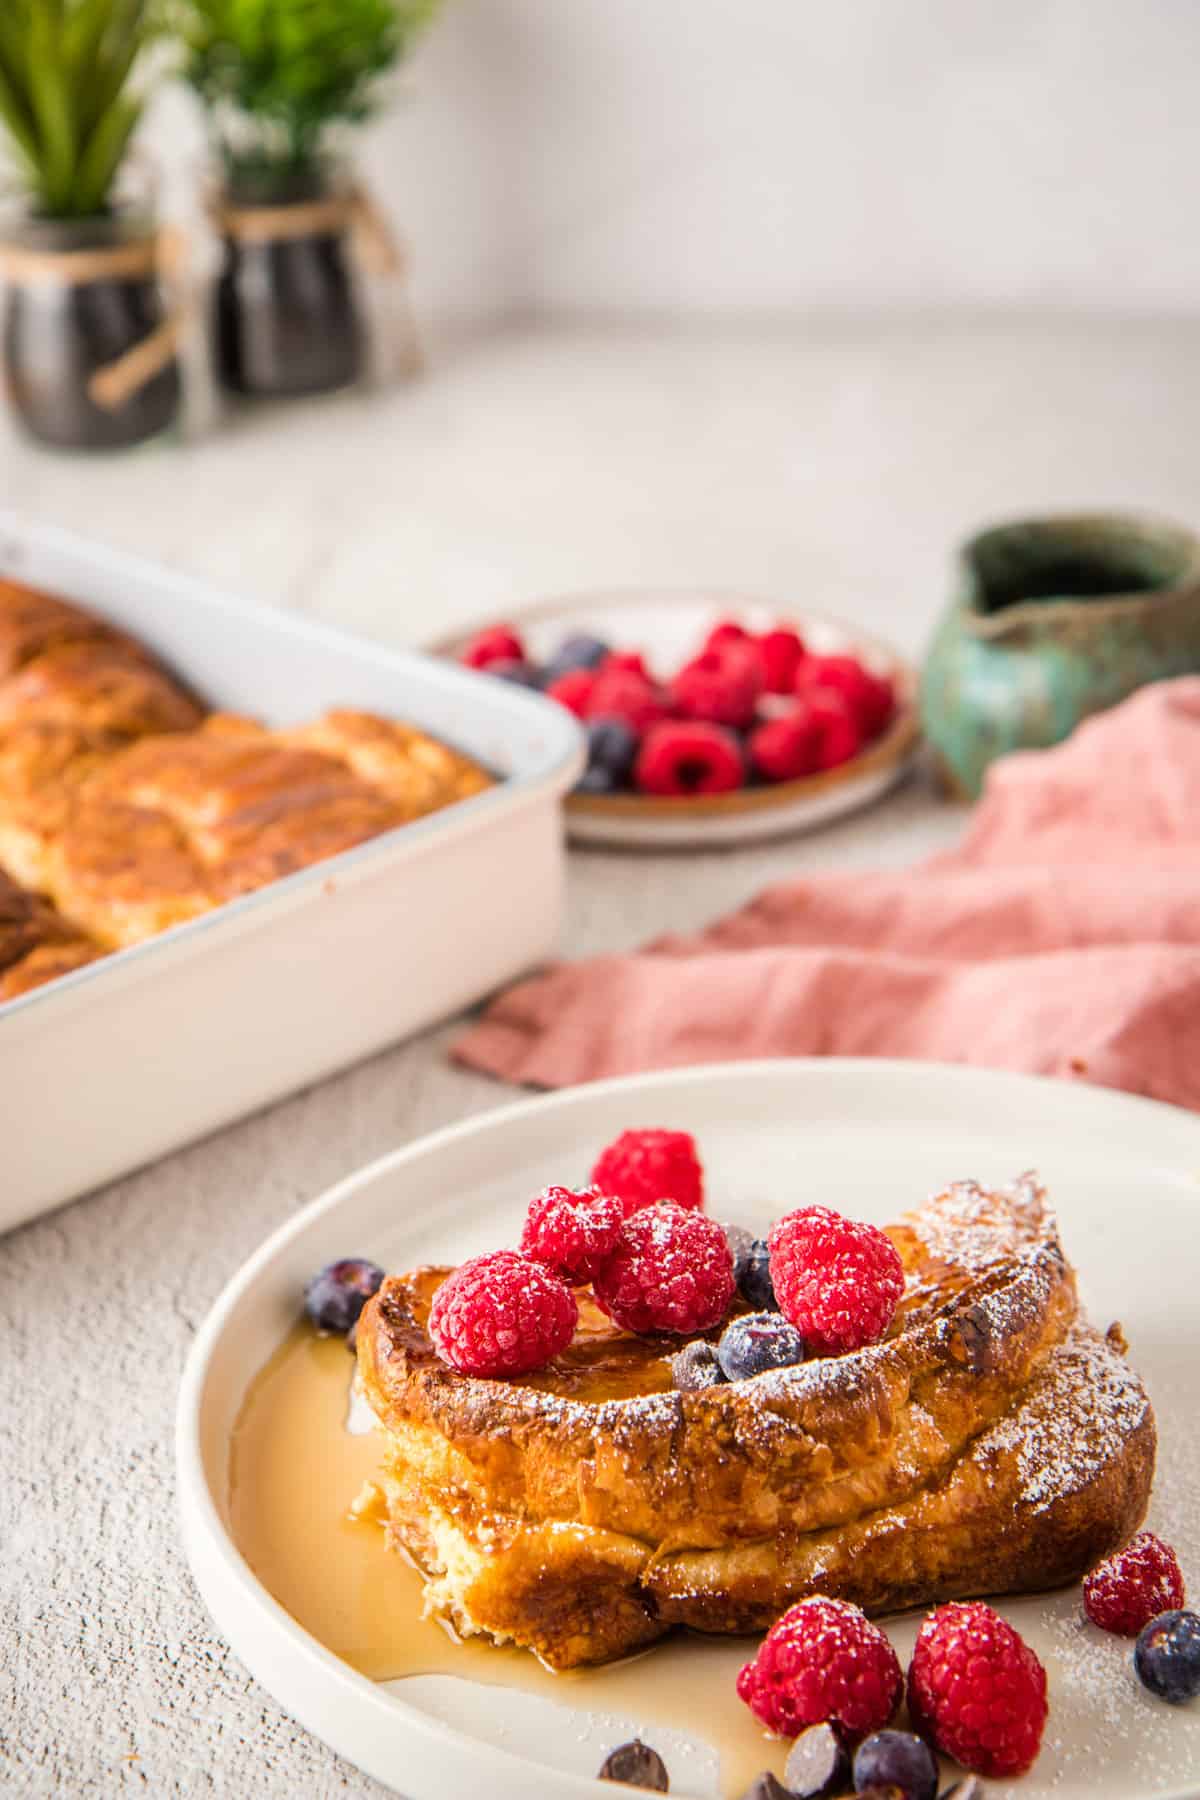 Close up of finished dish on white plate, with berries on top, and baking tray with croissant French toast bake in the background.